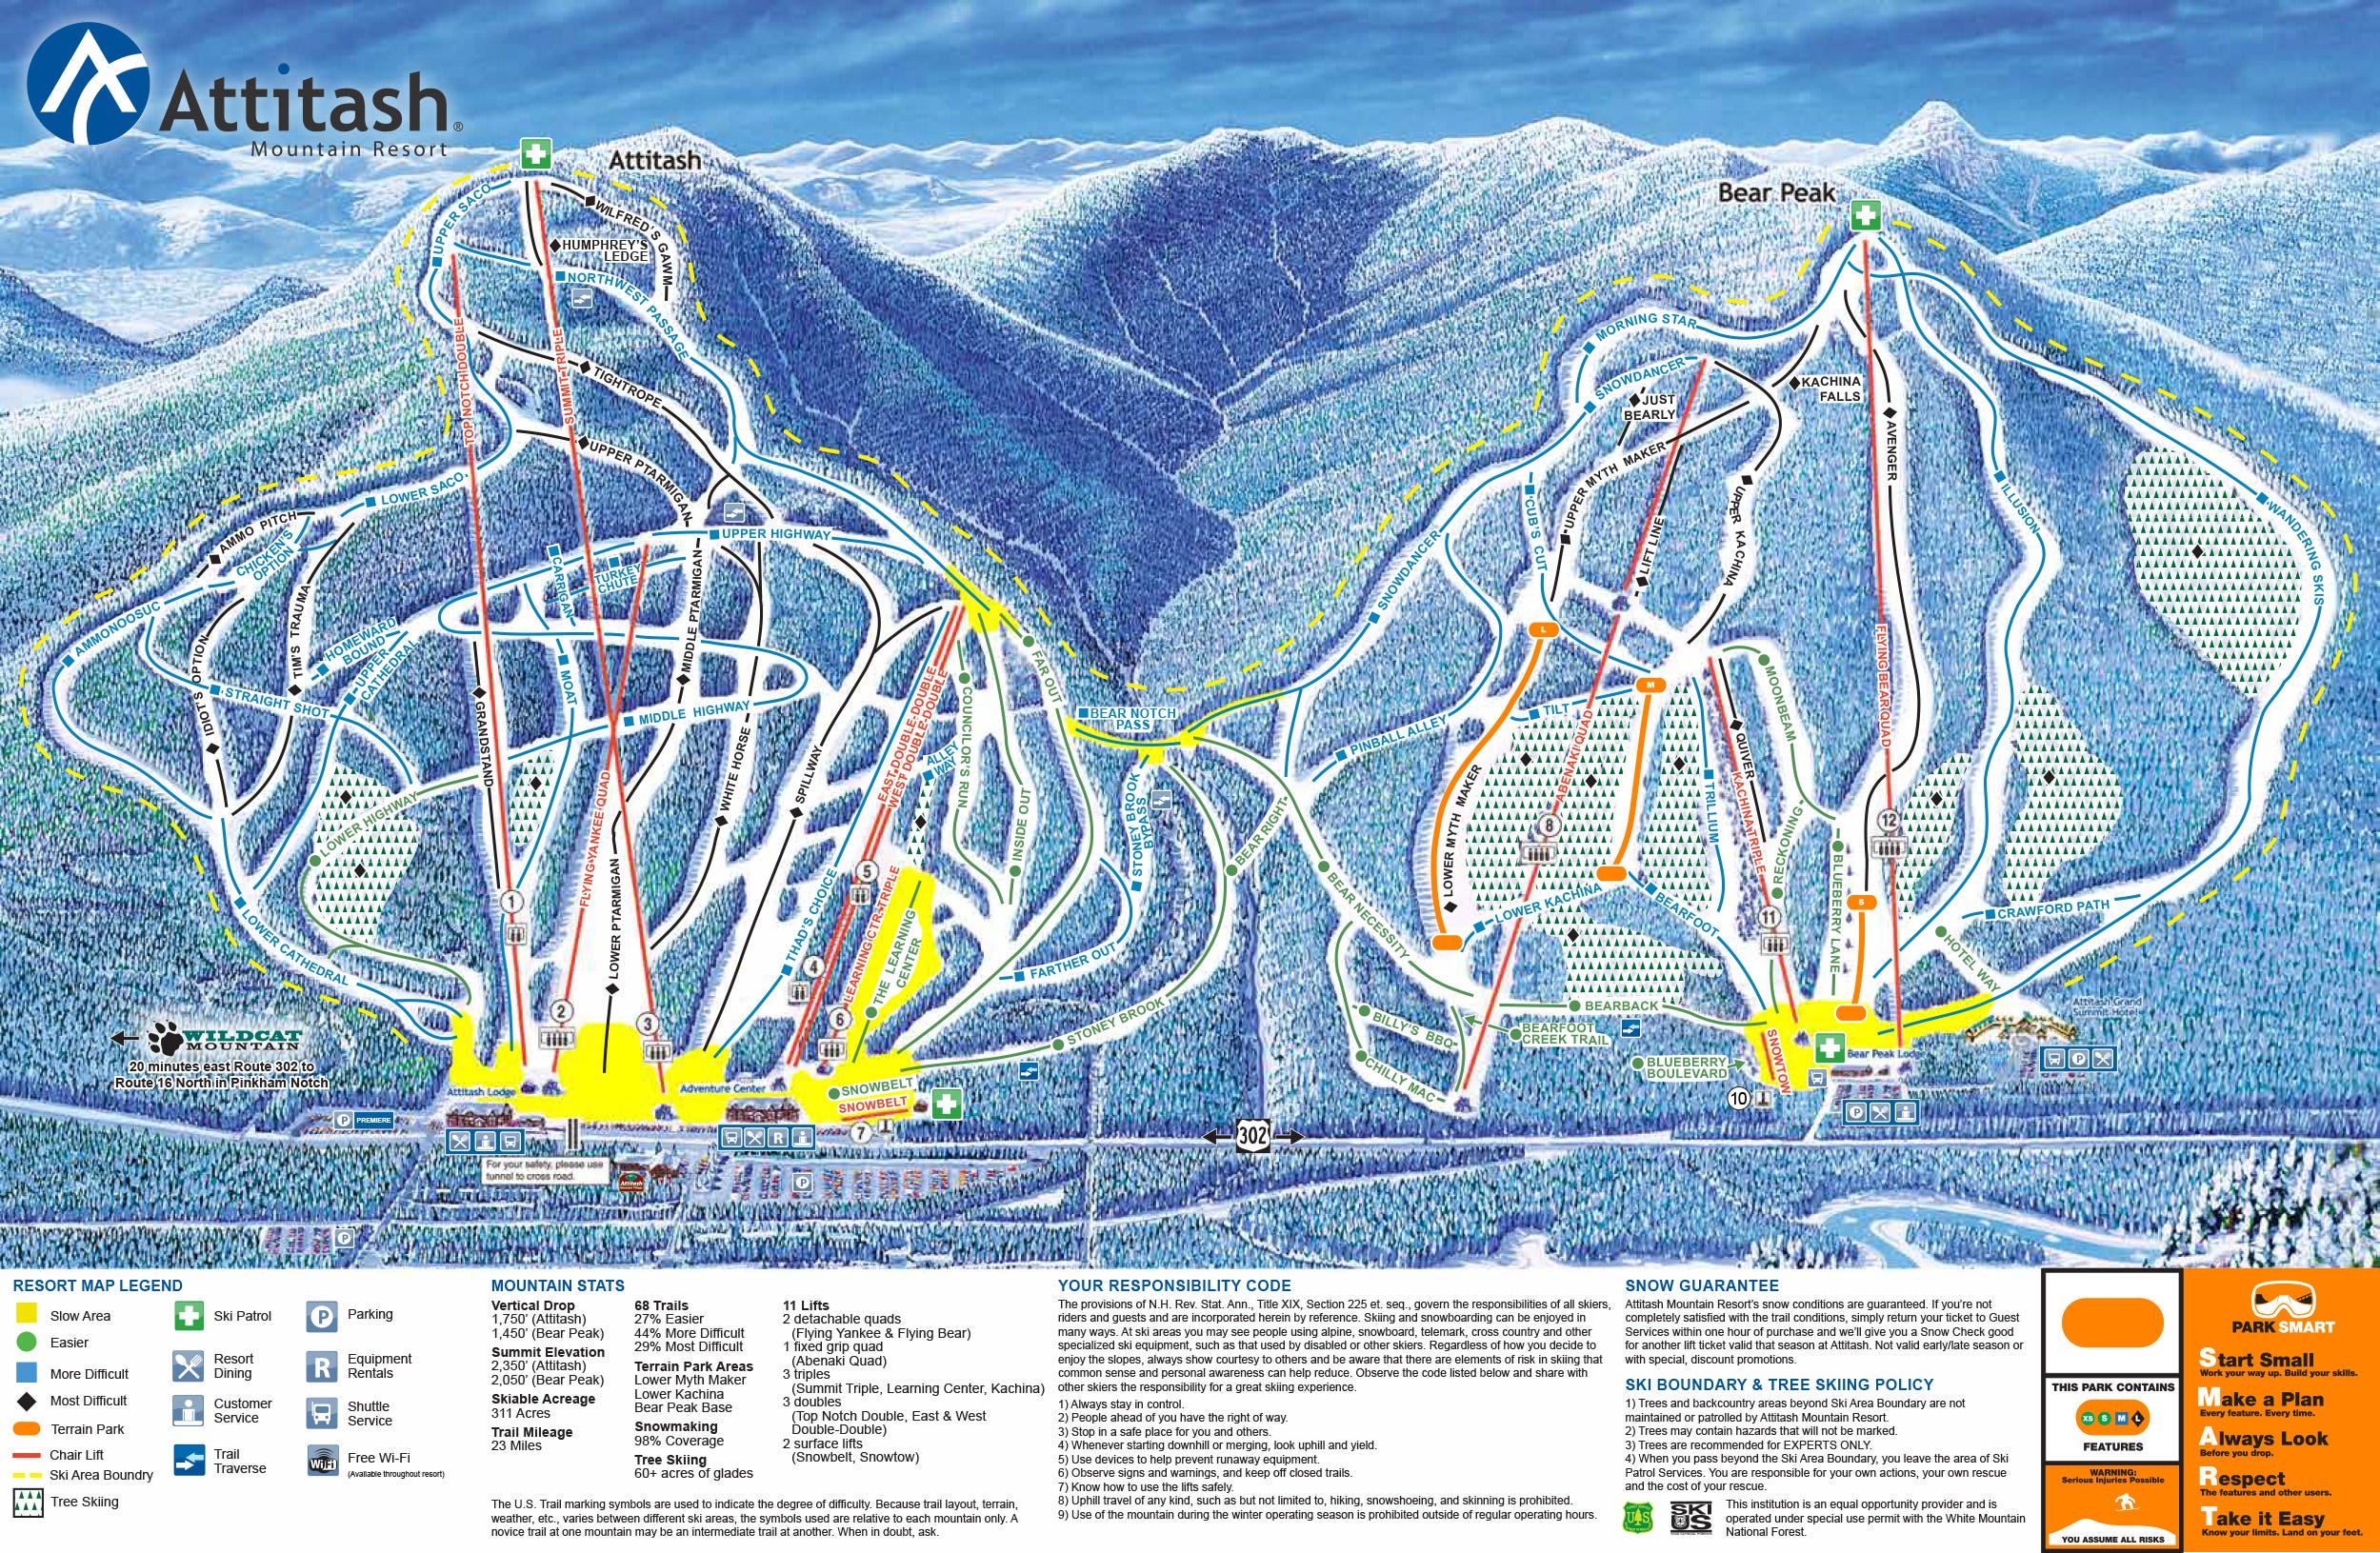 Vail to Upgrade Attitash Summit Triple, along with 5-Chair at Breckenridge  and Kehr's at Stevens Pass